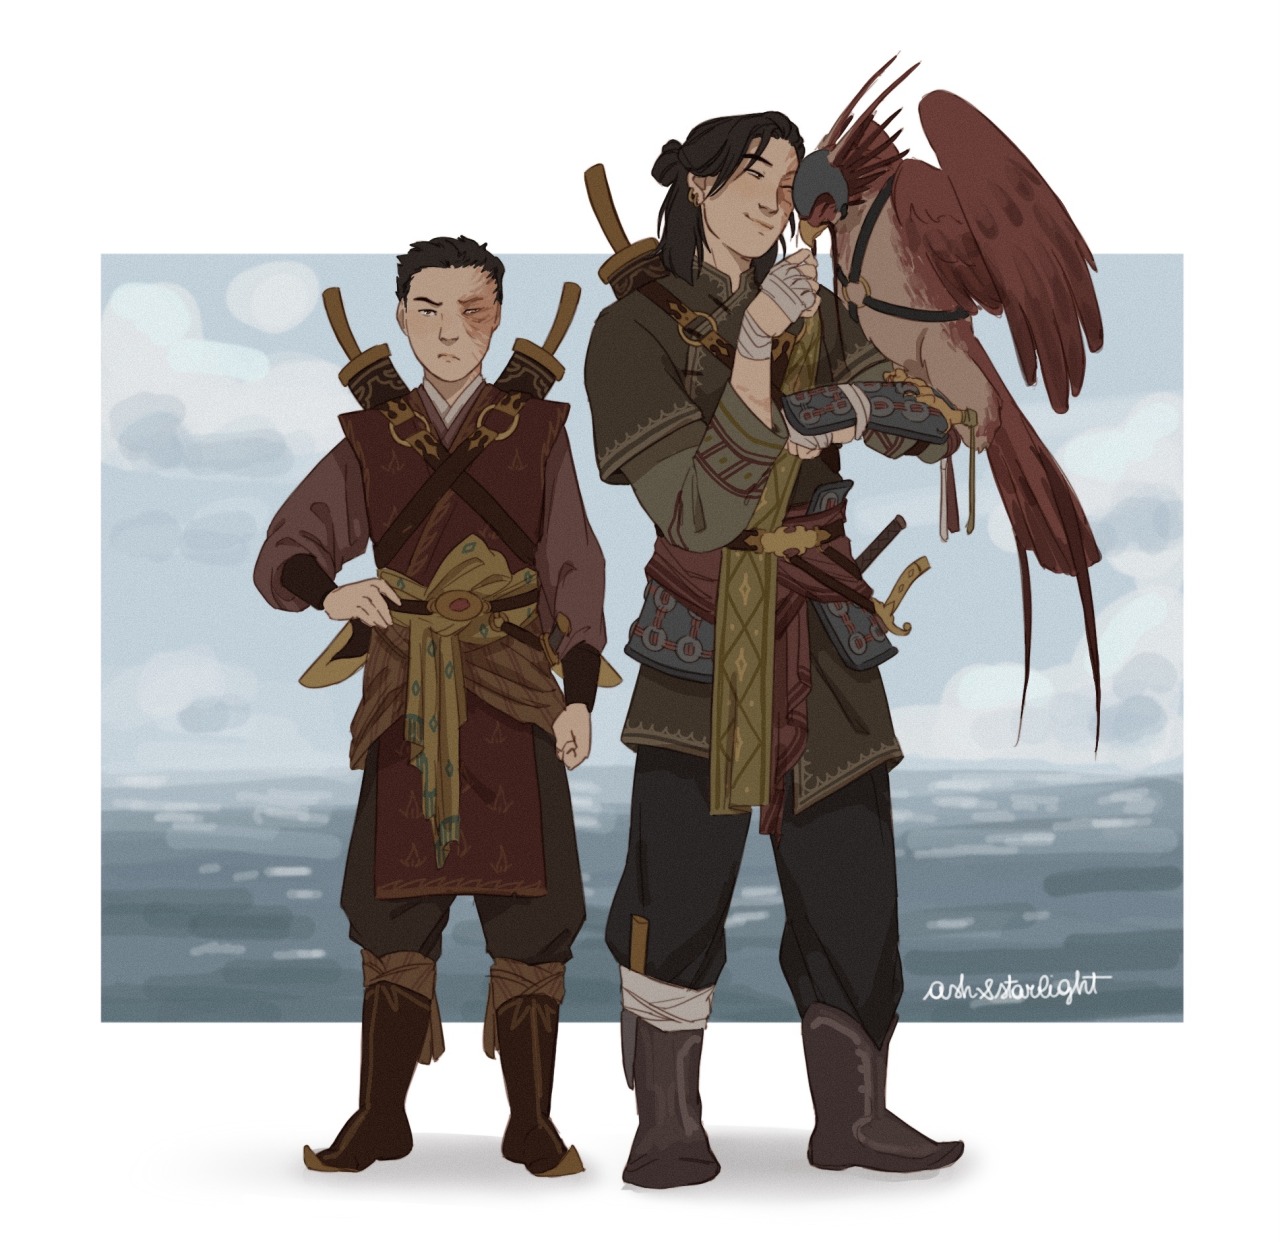 ash-and-starlight:ALTALTALTALTangy pirate zuko & crew have been on the mind lately 